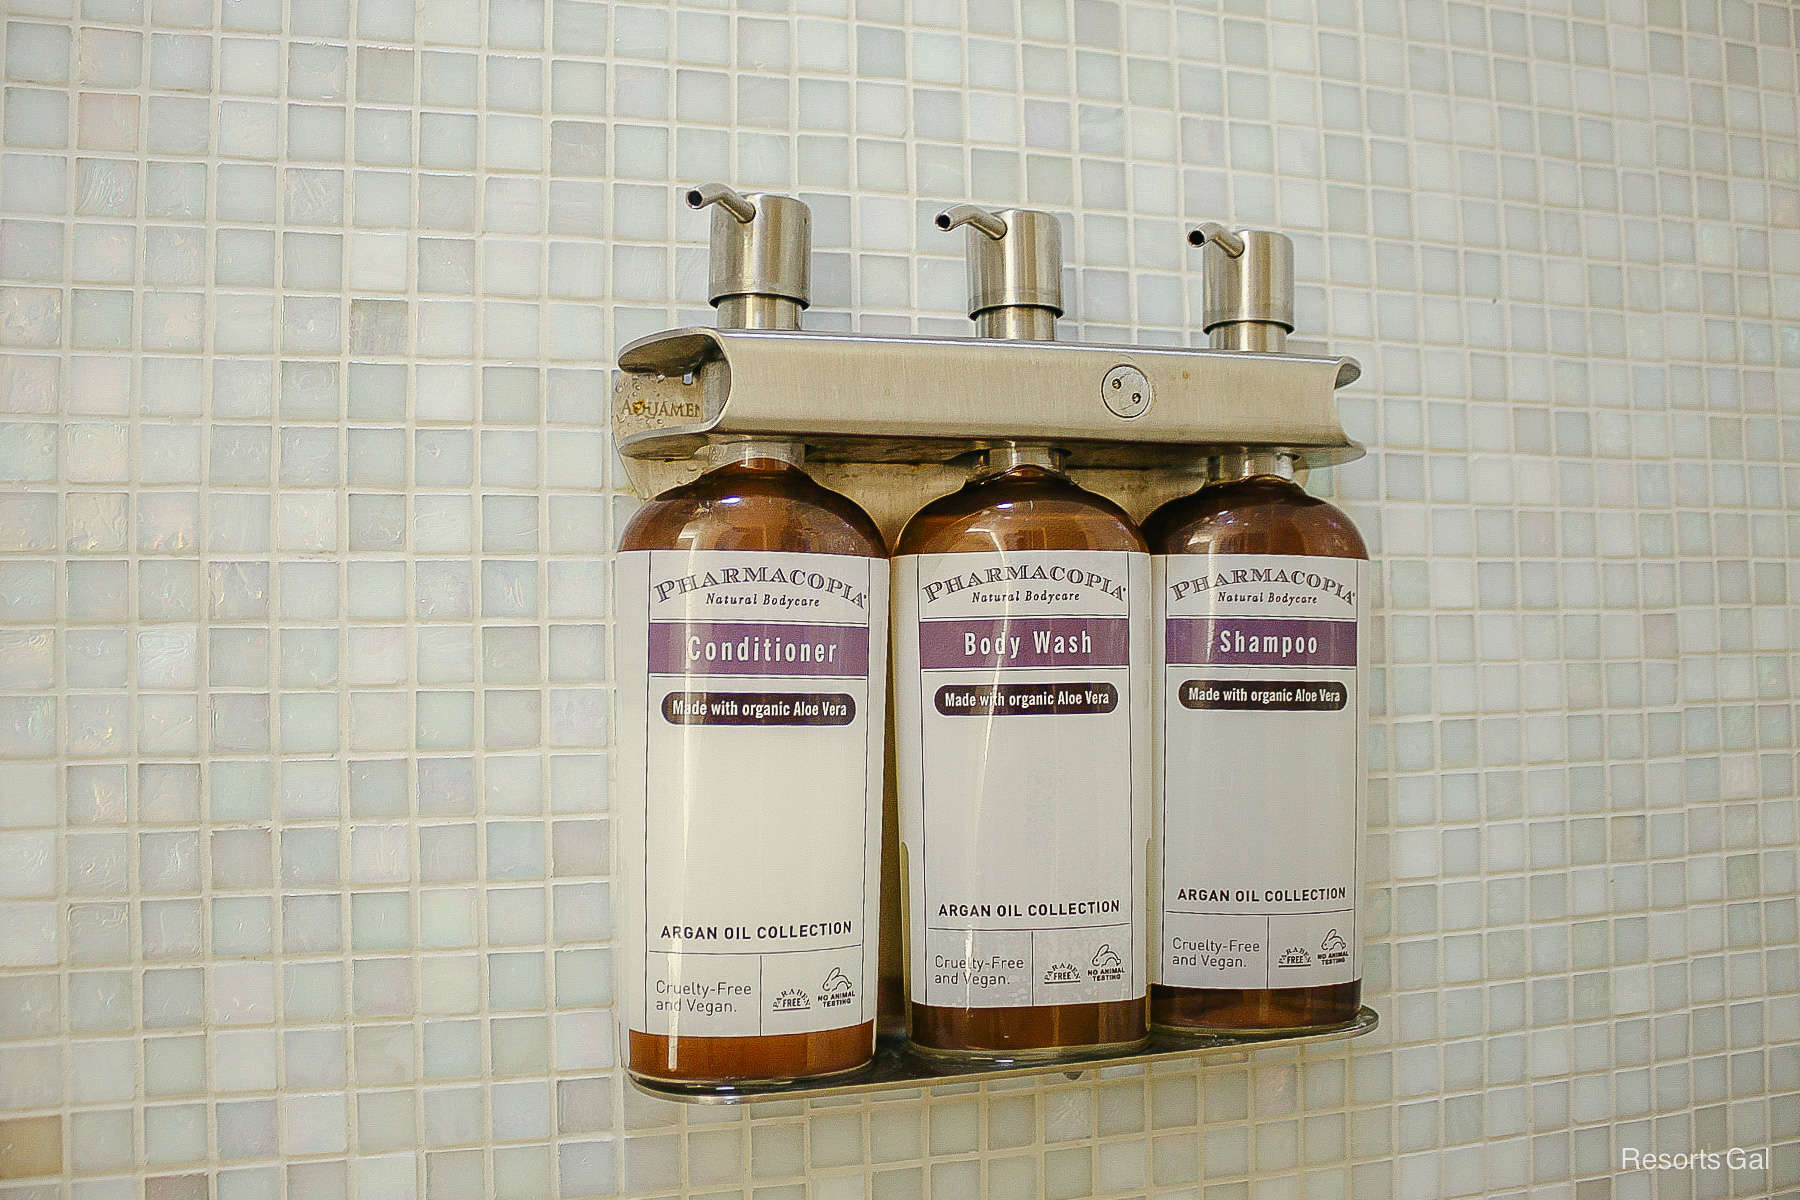 built-in body wash, shampoo, and conditioner